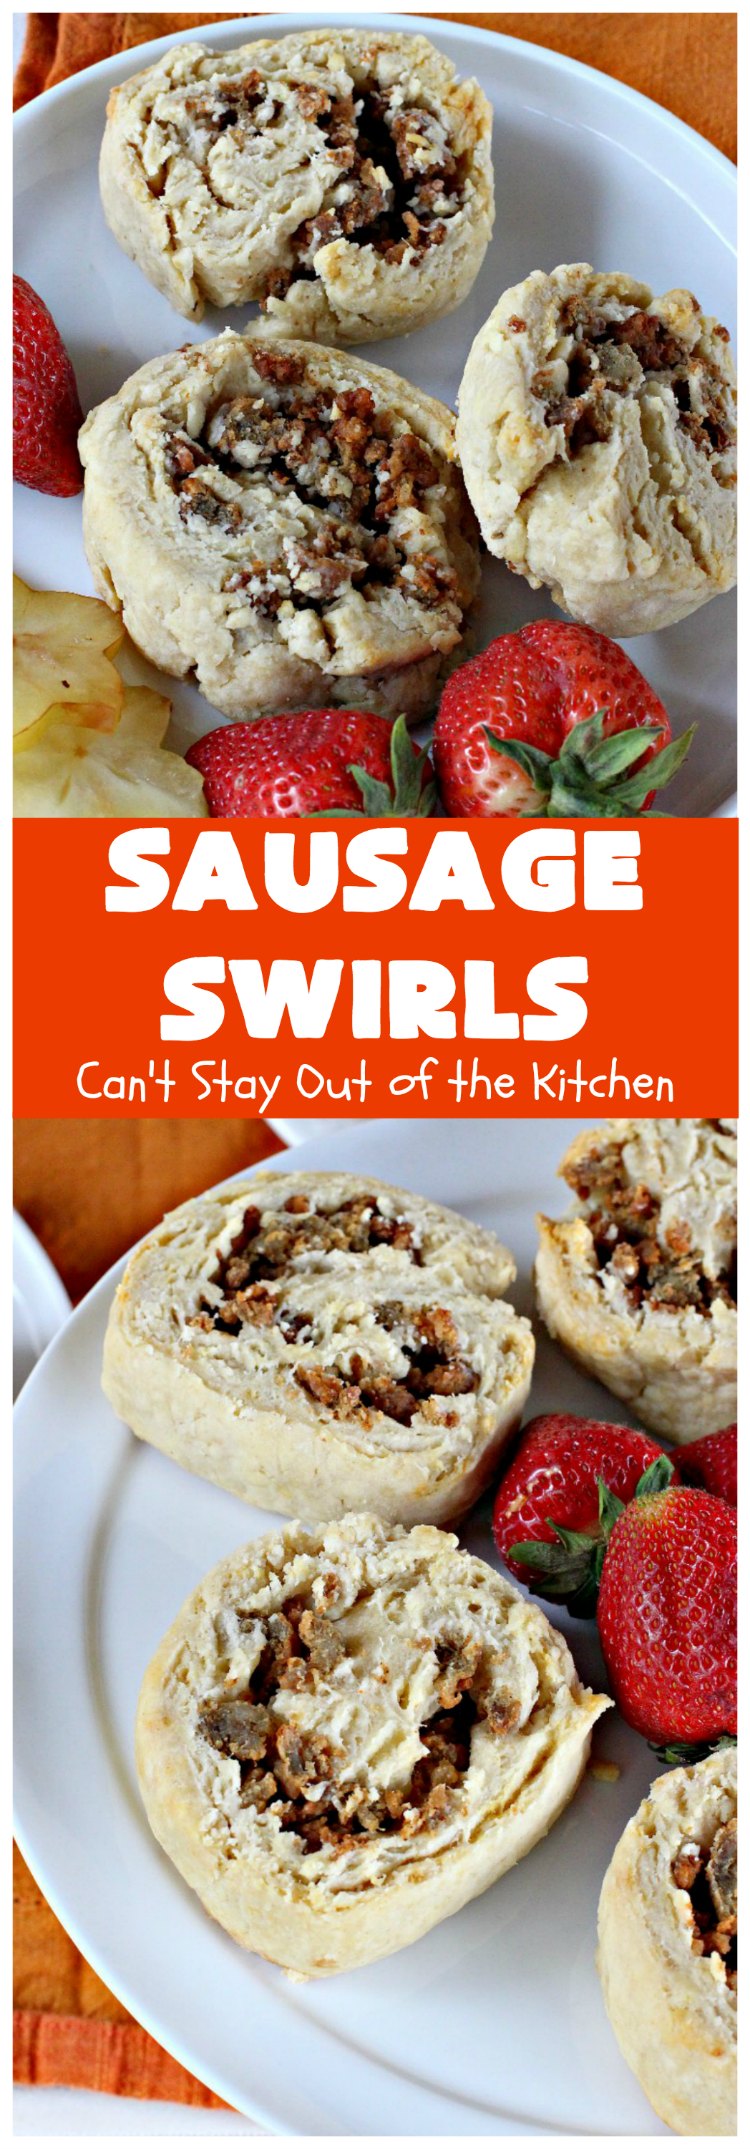 Sausage Swirls | Can't Stay Out of the Kitchen